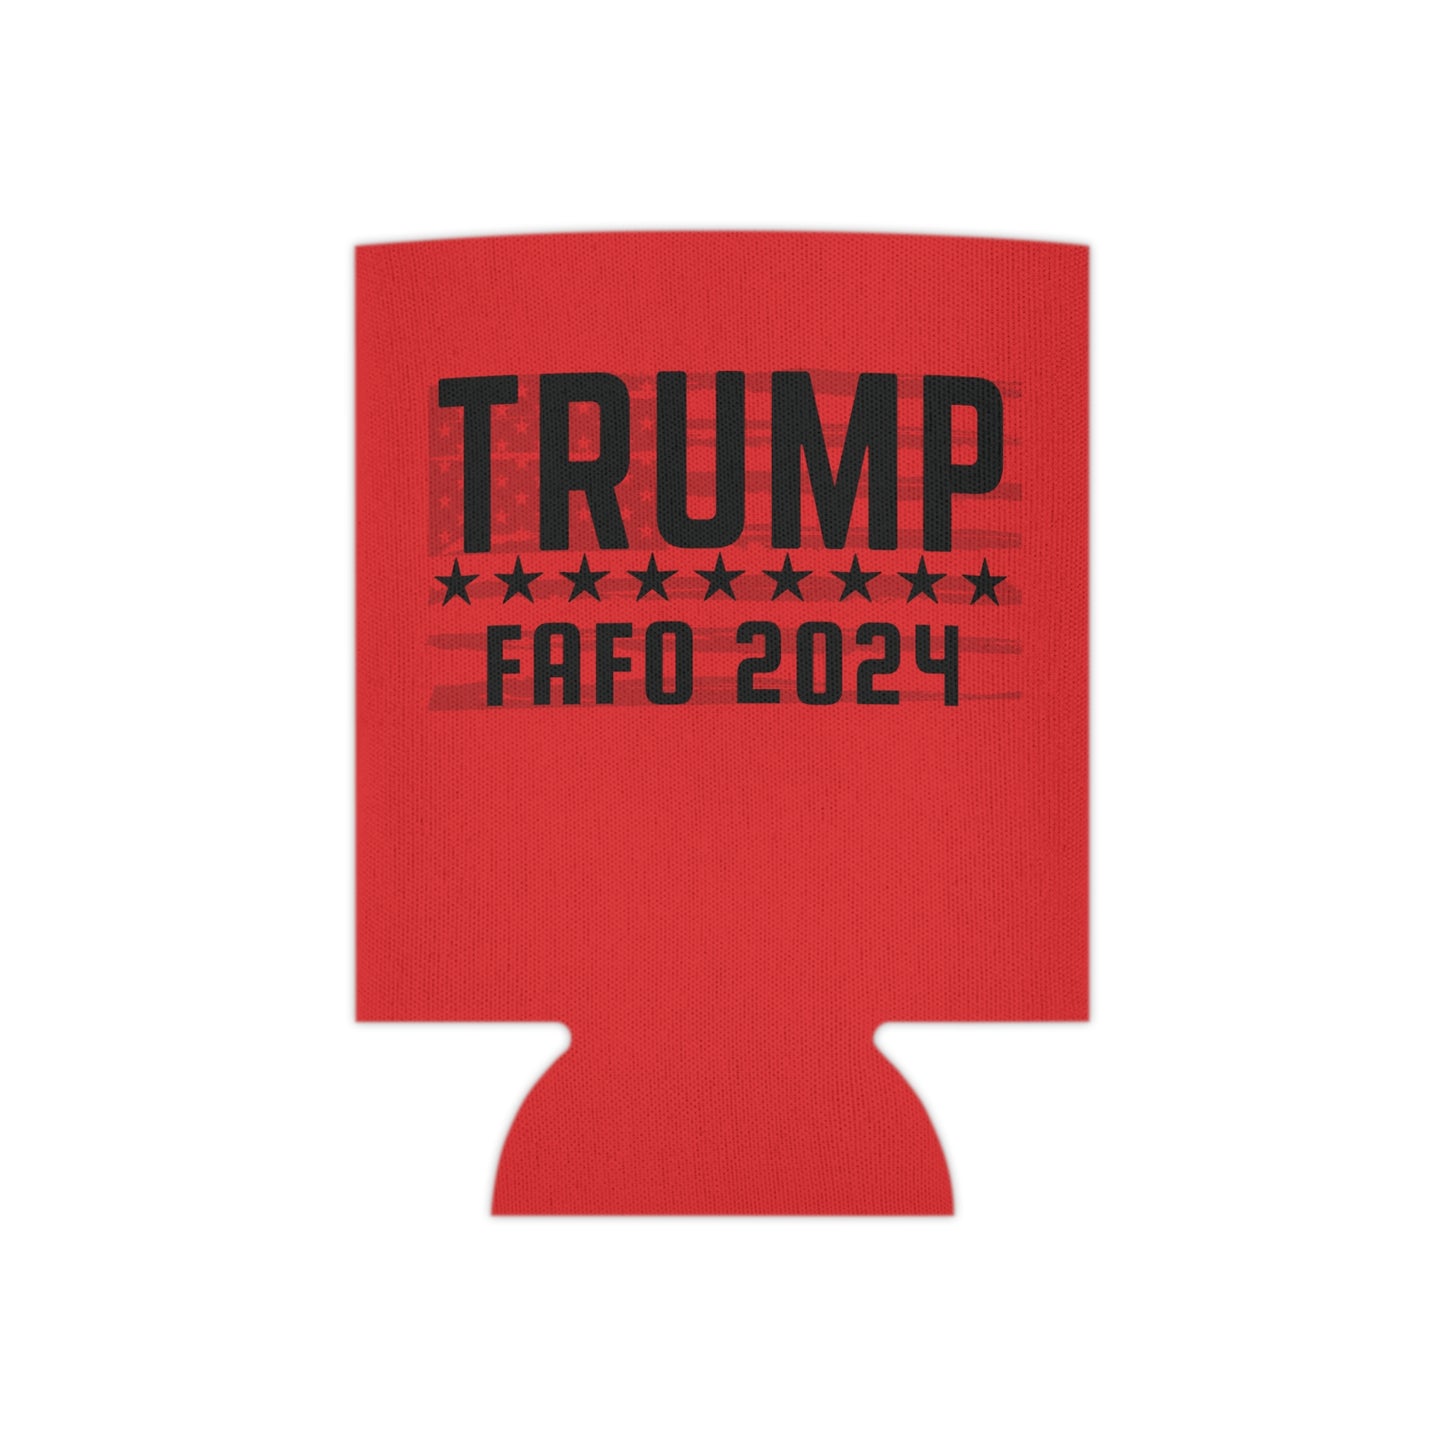 TRUMP FAFO 2024 Can Cooler